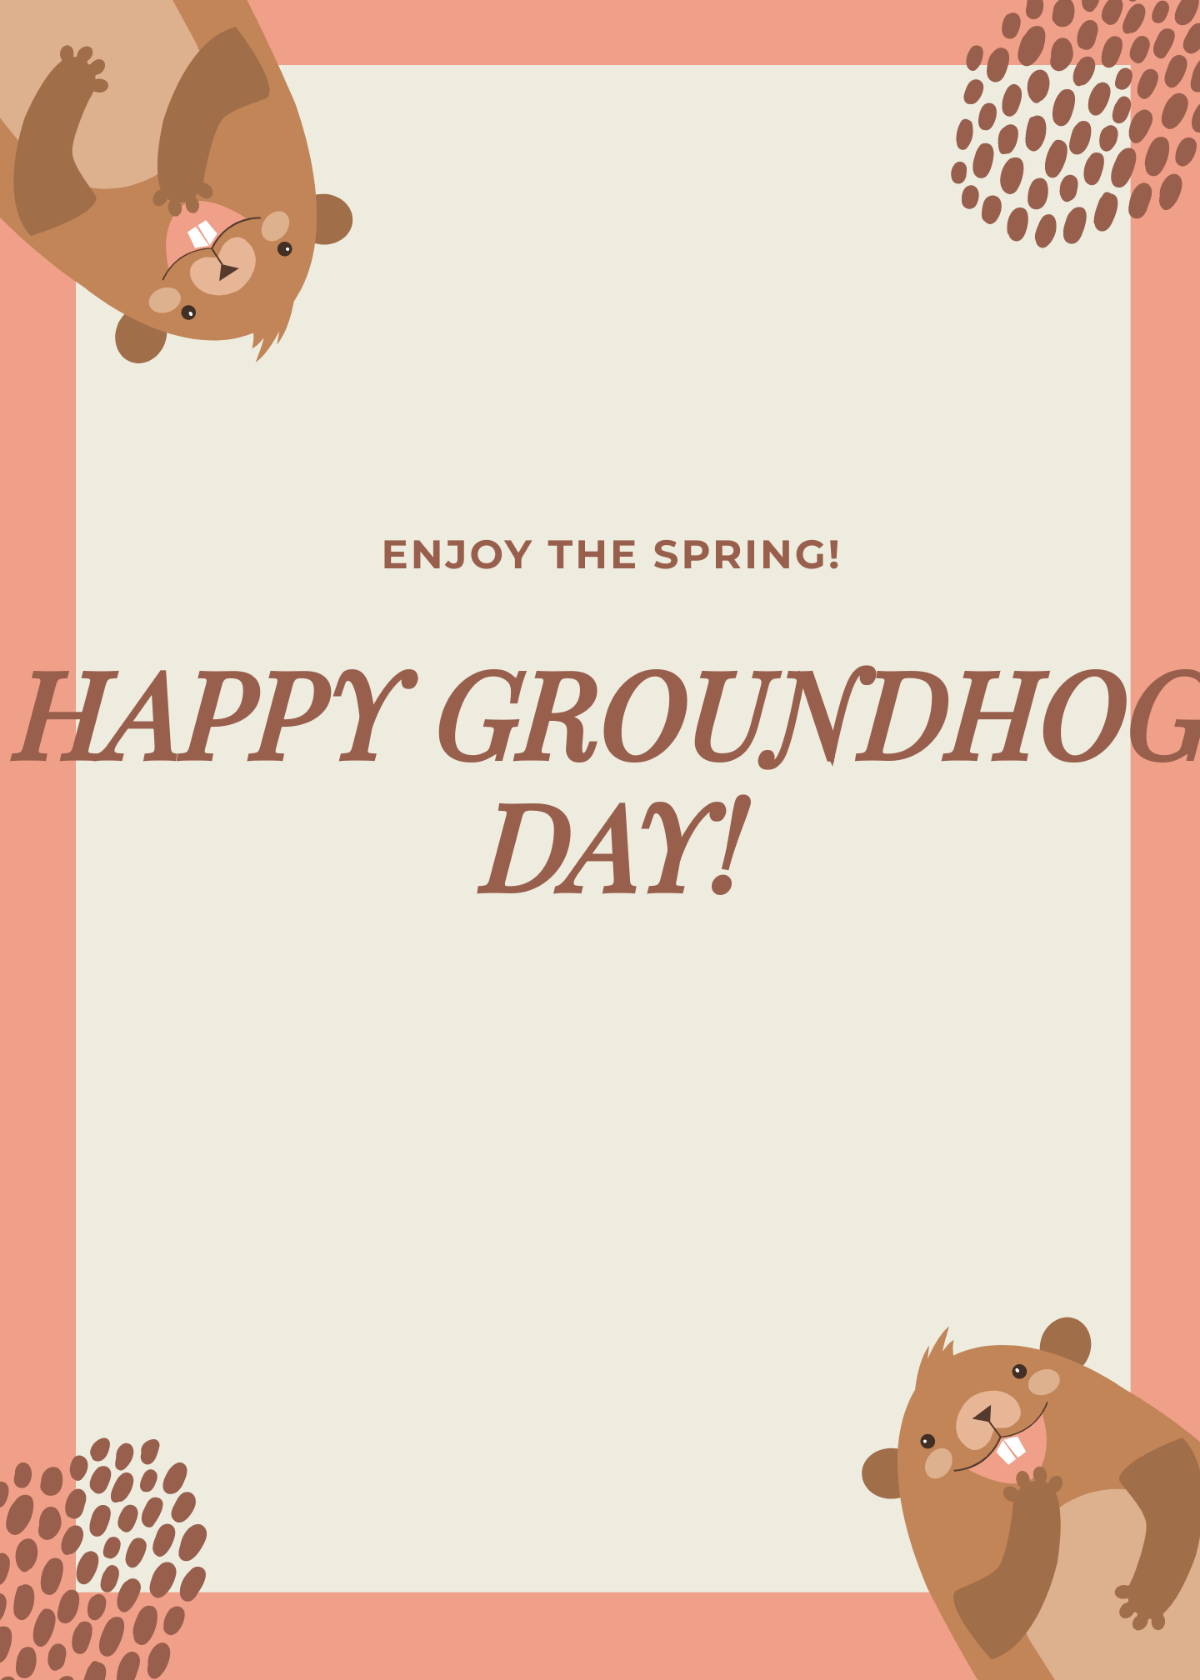 Official Groundhog Day Card Template